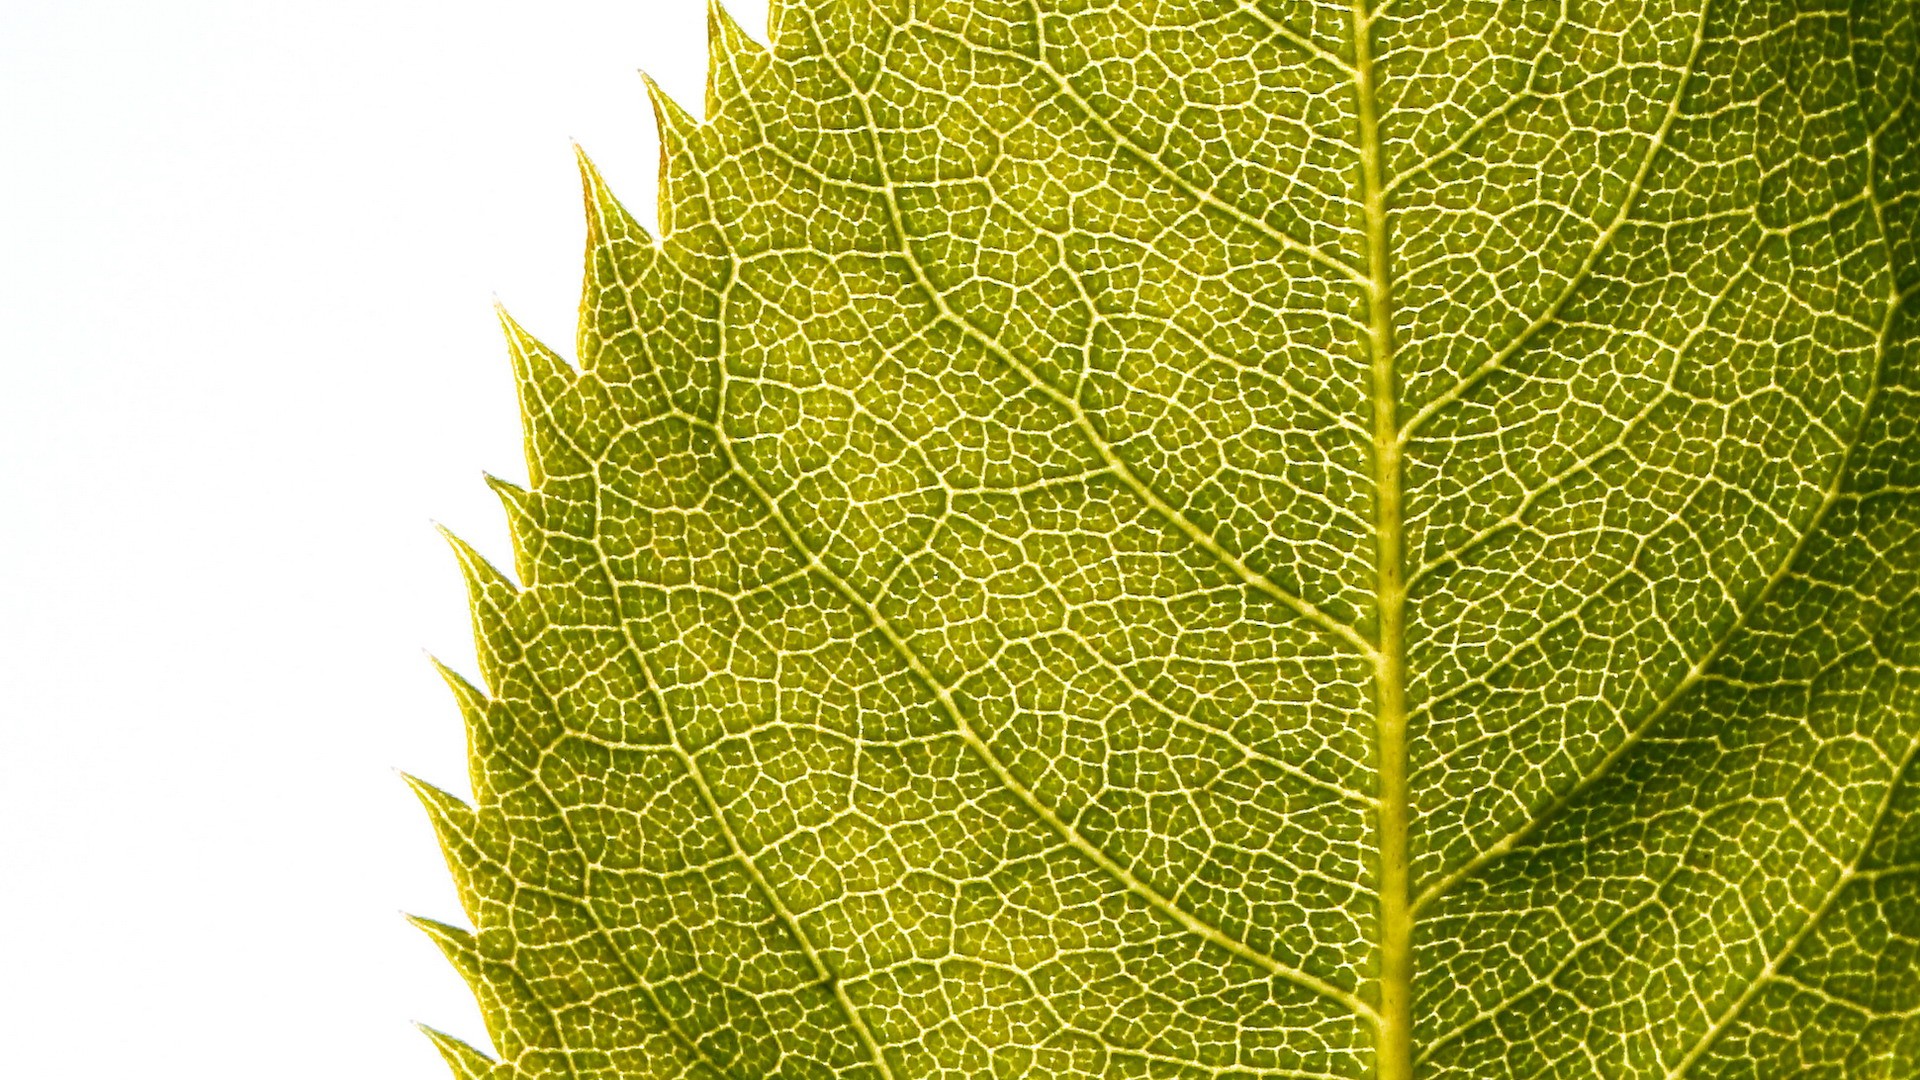 Leaf Images Hd With White Background - HD Wallpaper 